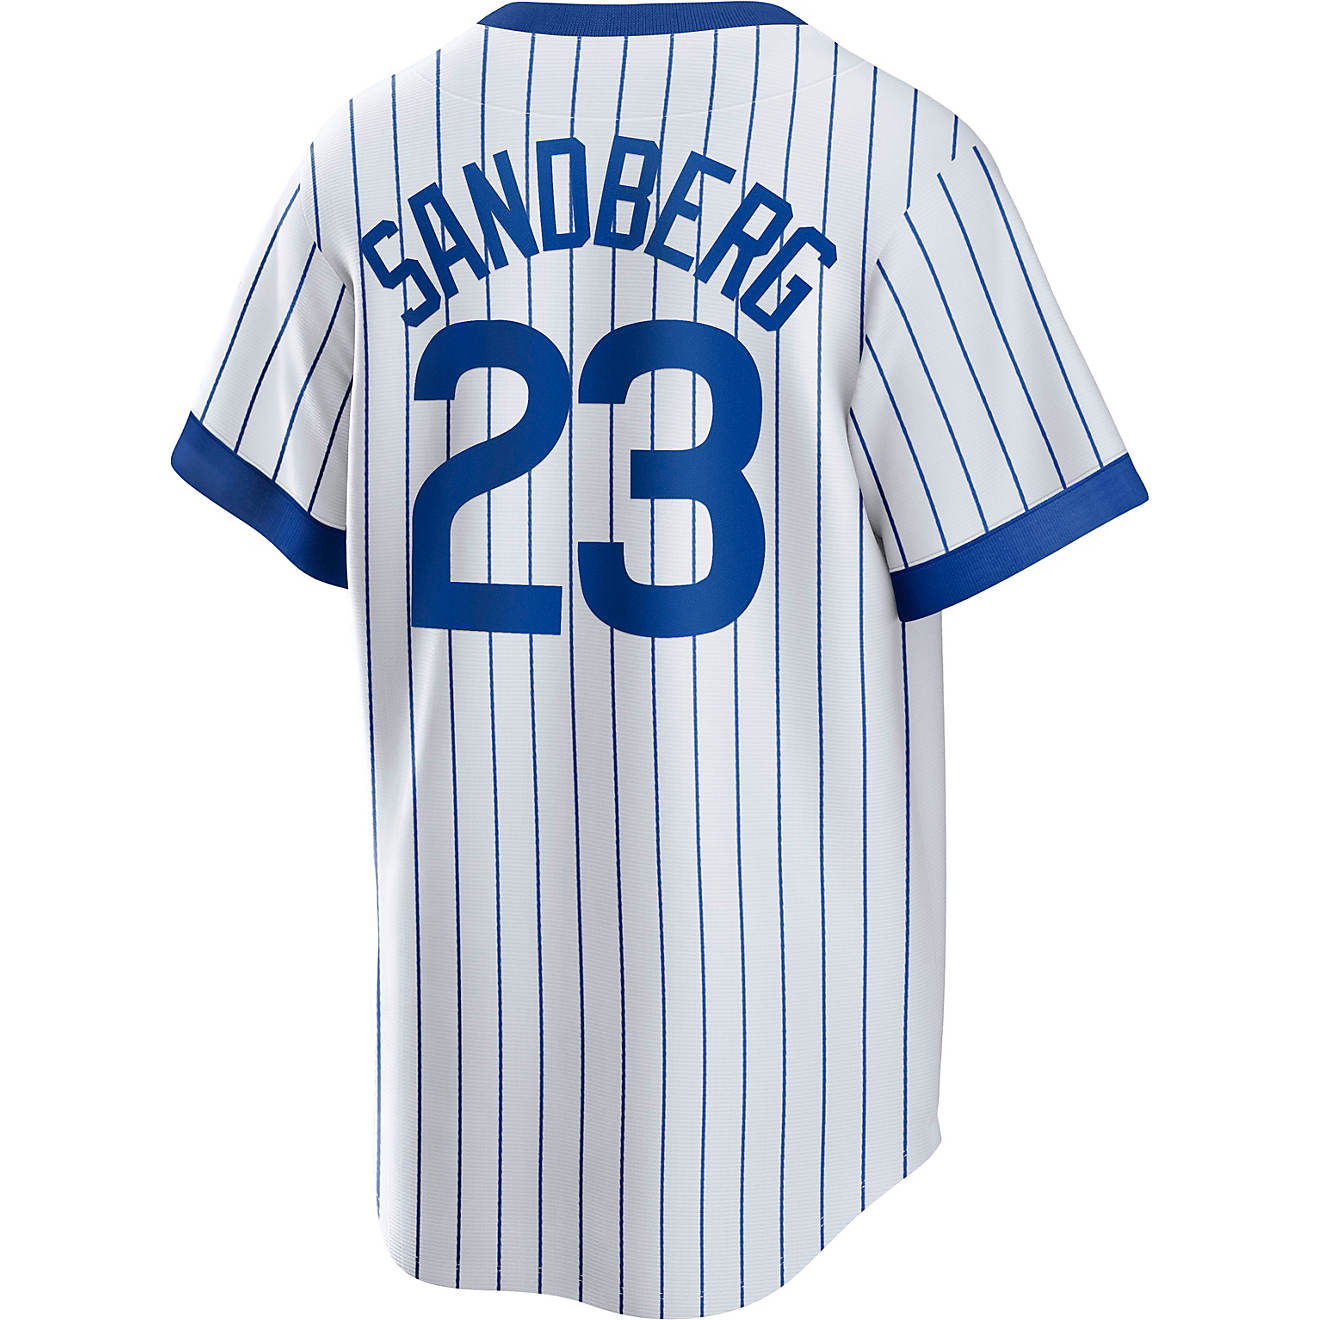 chicago cubs 23 jersey